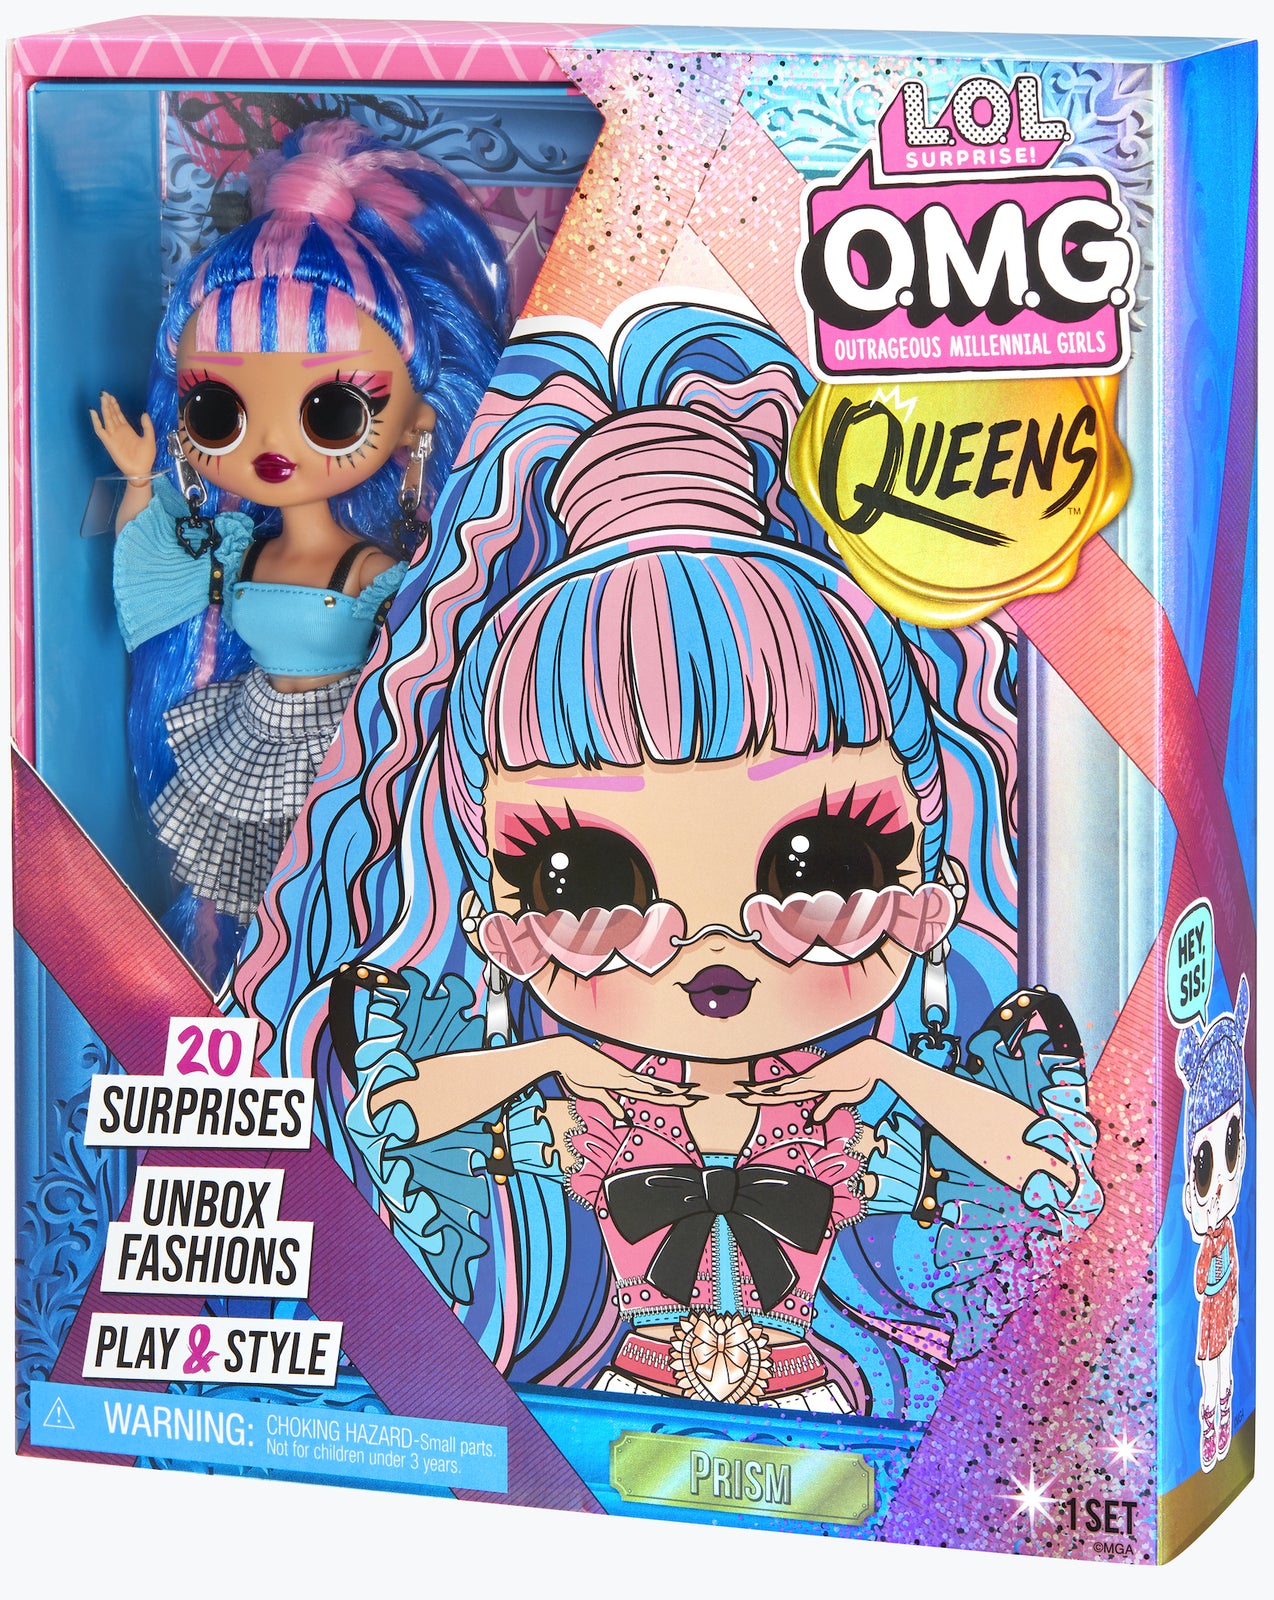 LOL SURPRISE! OMG Queens Dolls from MGA Entertainment Unboxing +